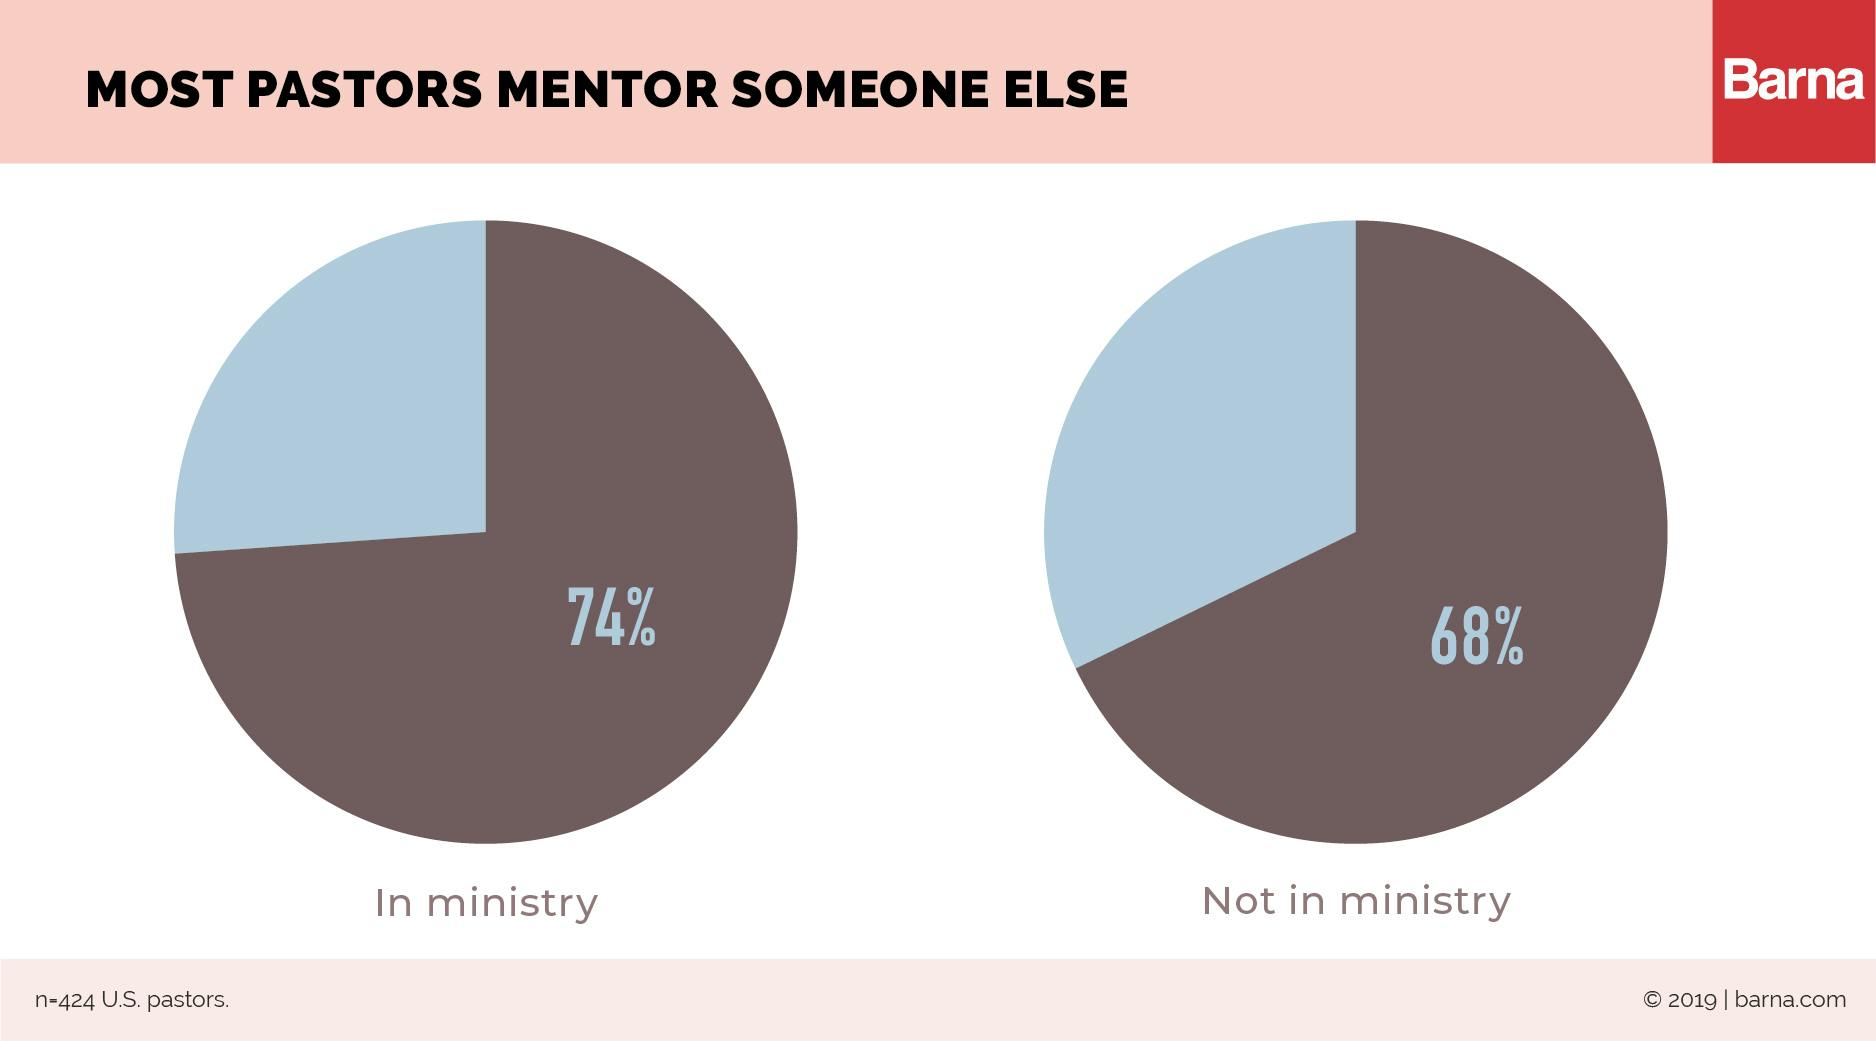 A Majority of Pastors Personally Mentor Someone Else.